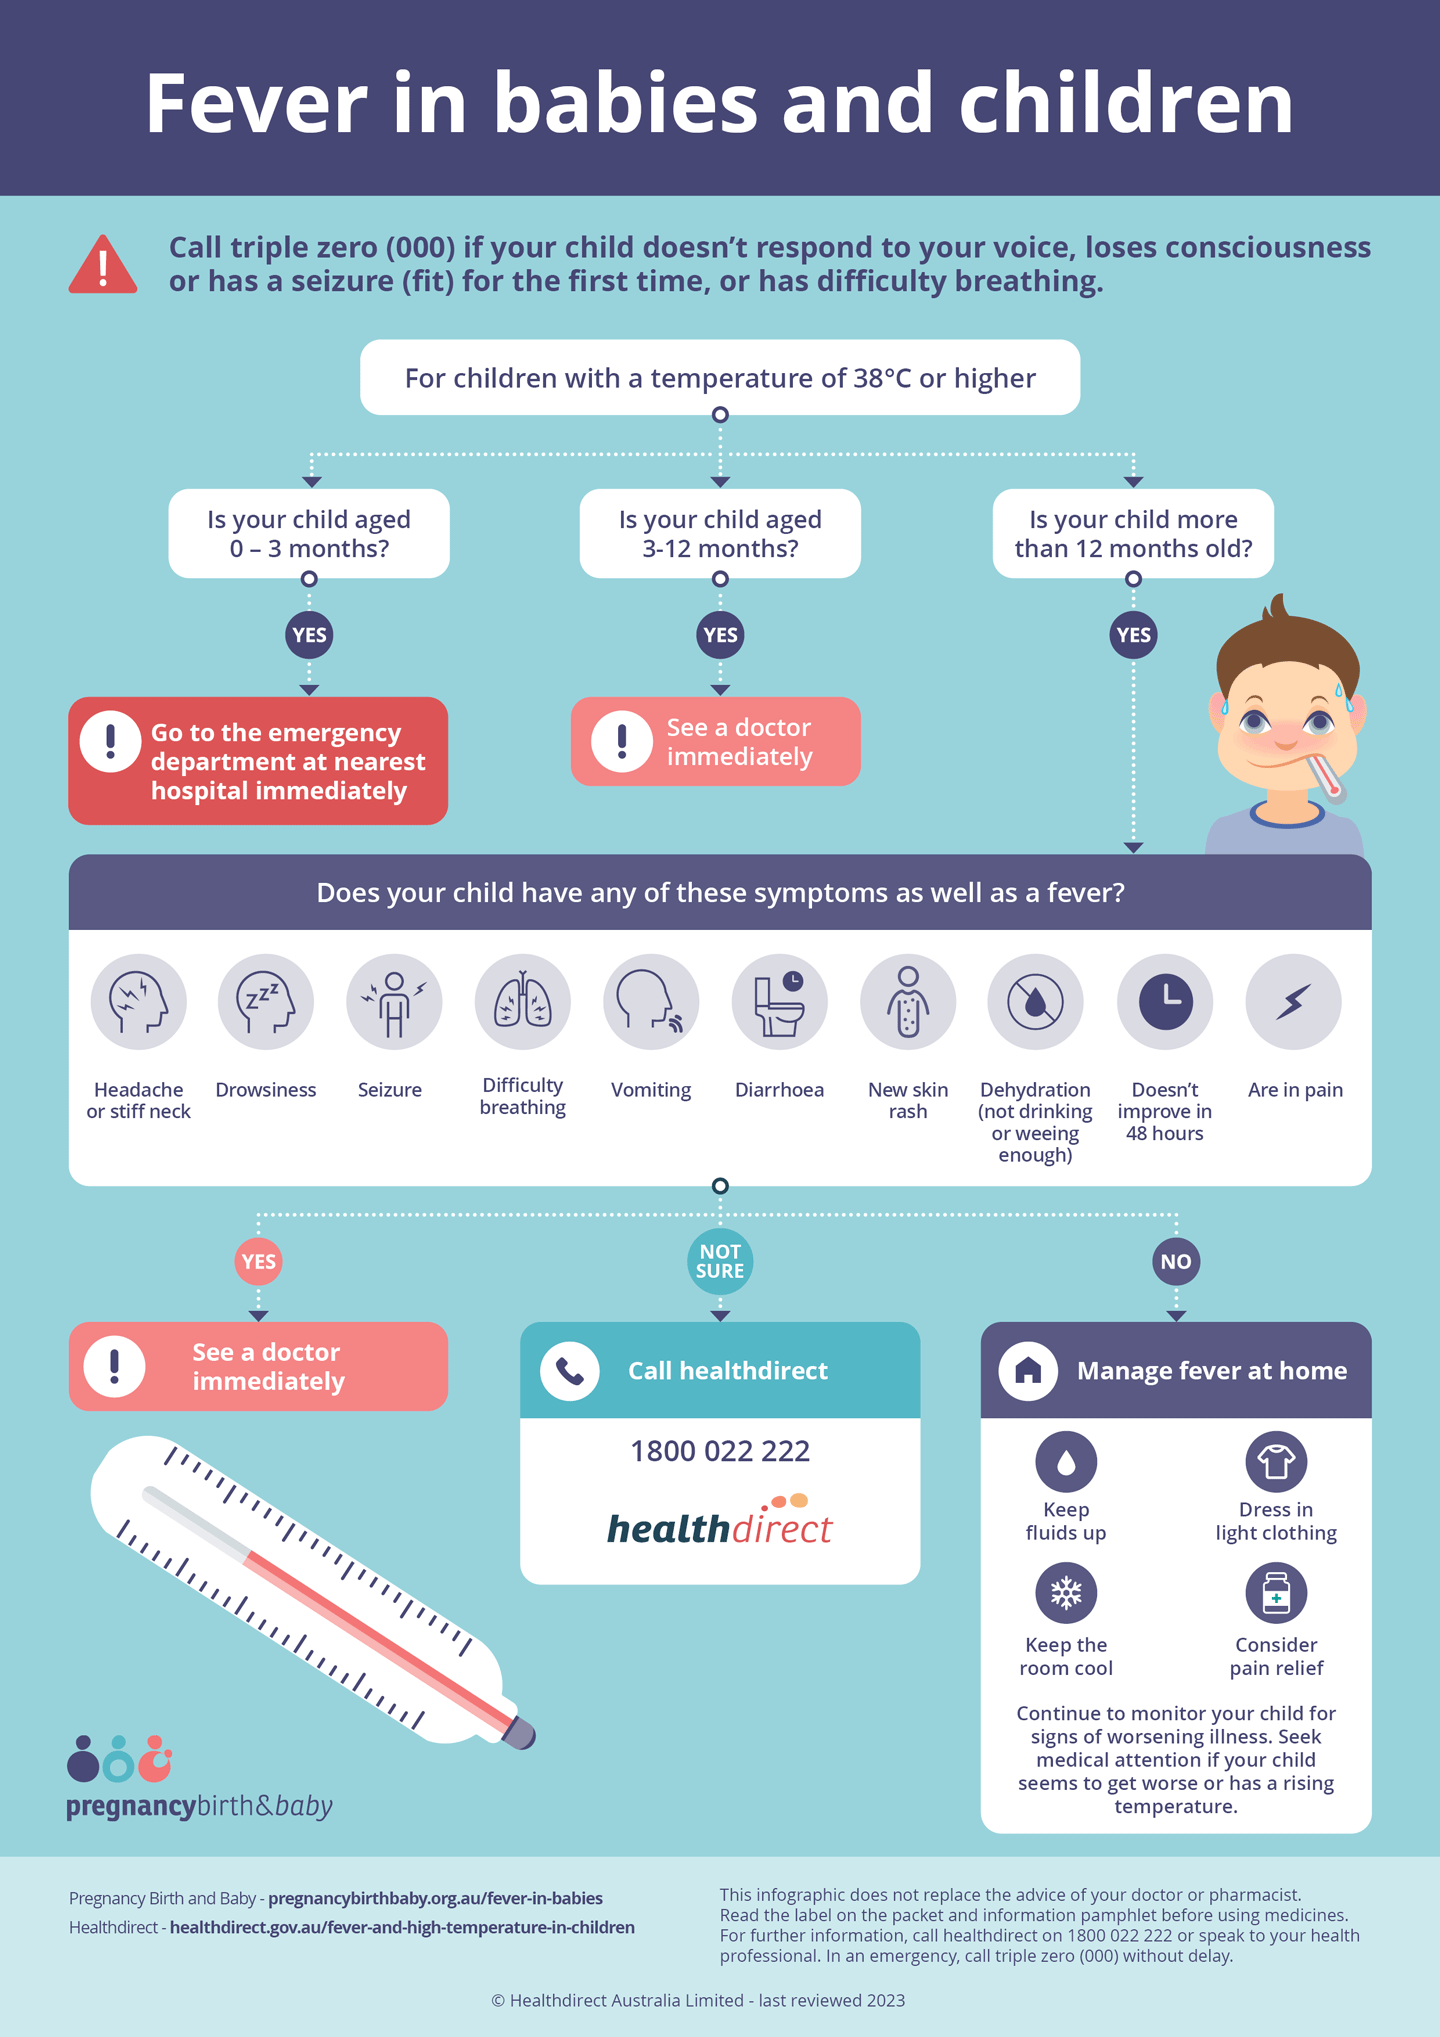 Infographic showing esclation flowchart for fever in babies and children.